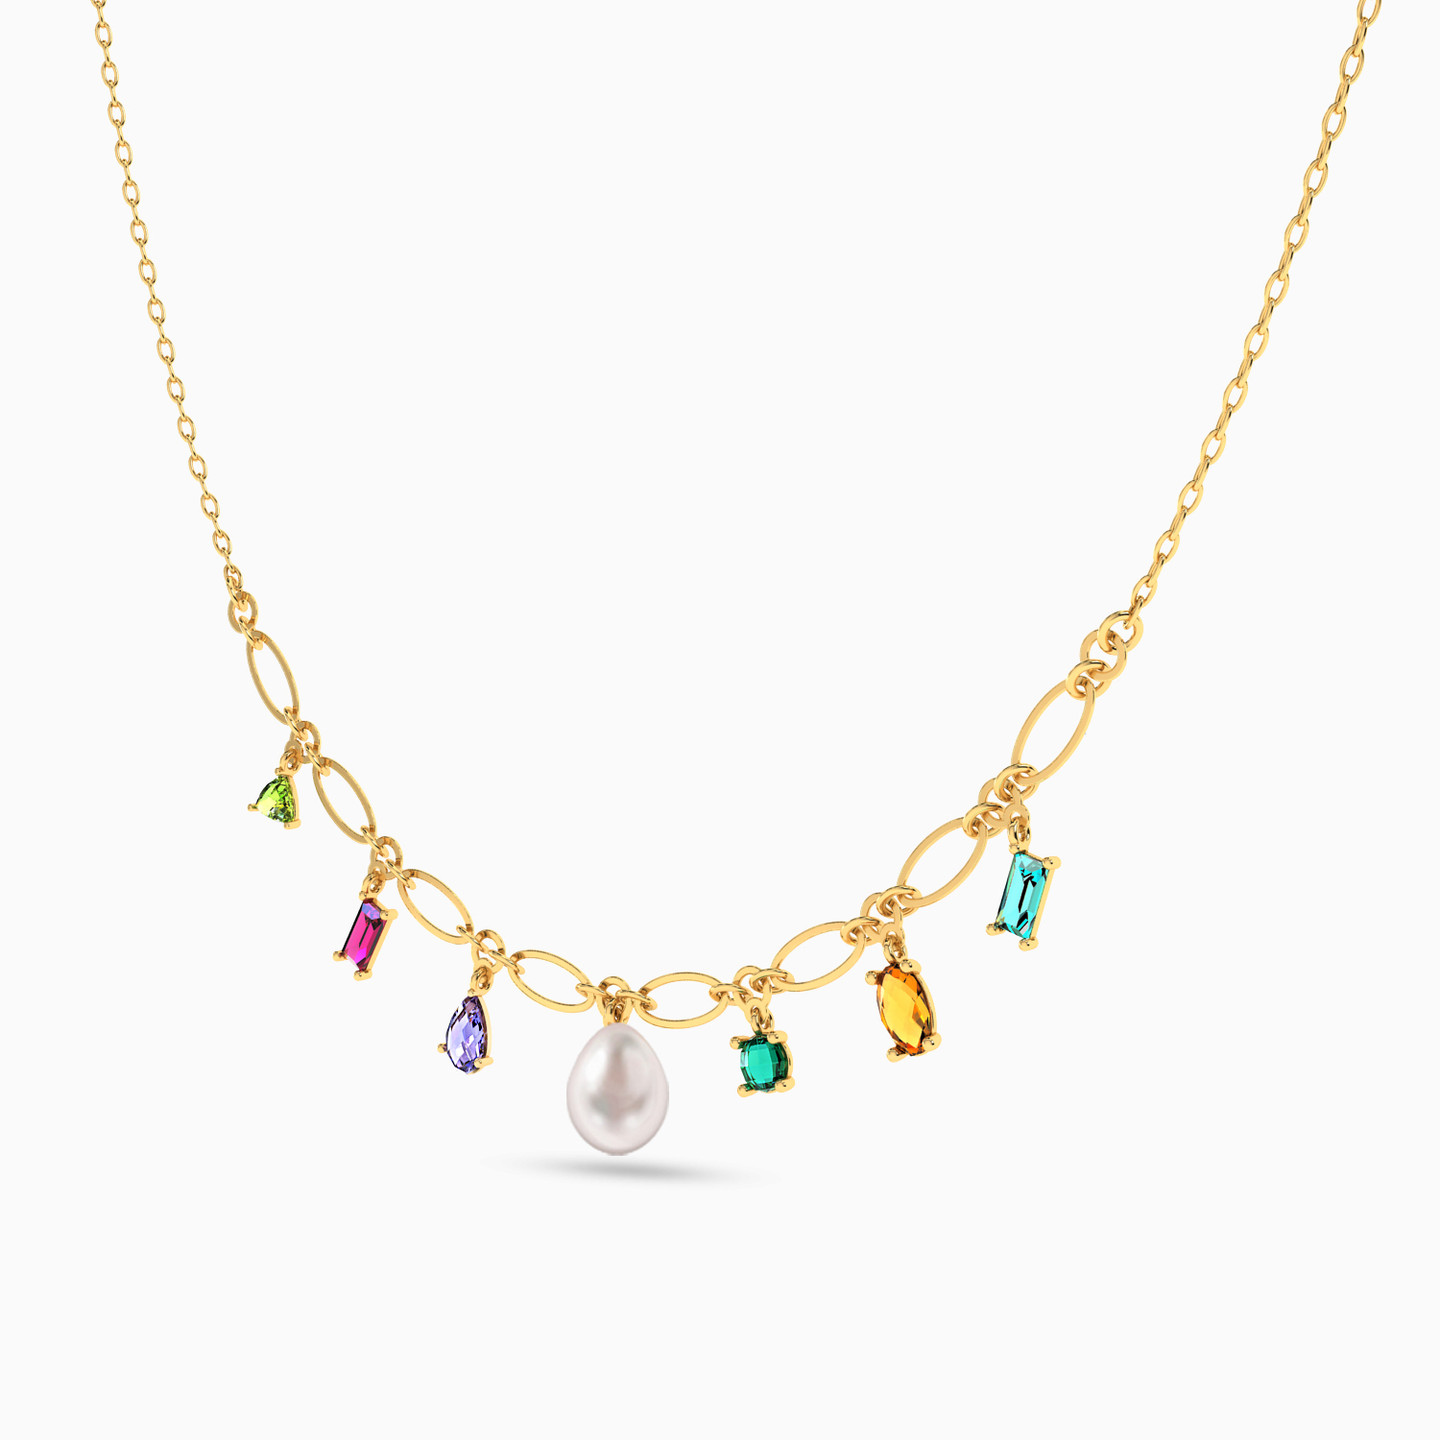 18K Gold Pearls & Colored Stones Charms Necklace - 2